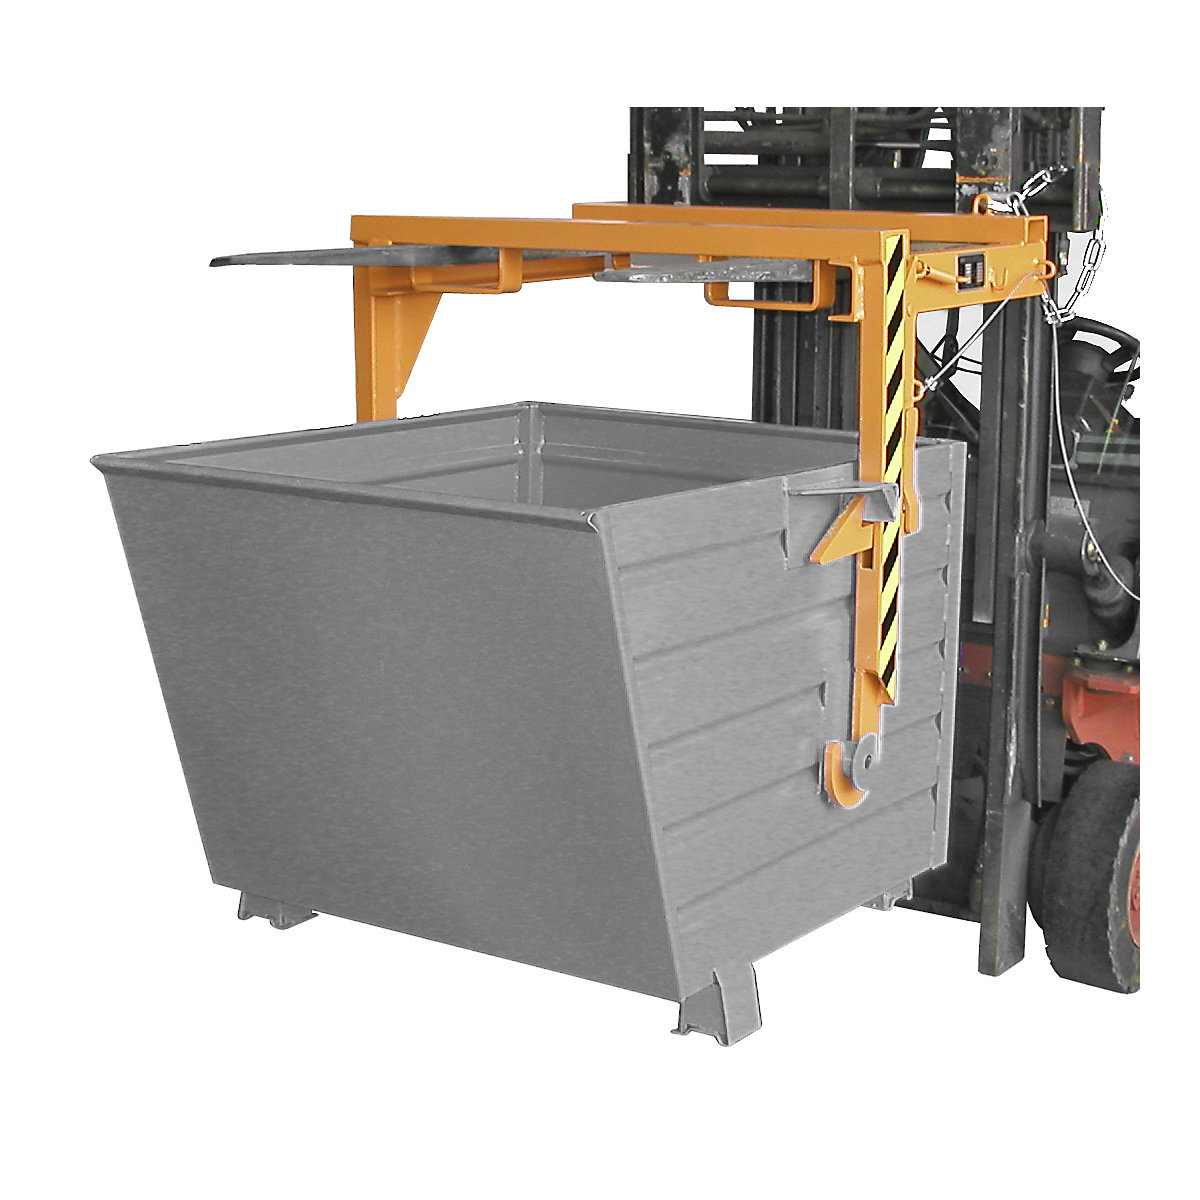 Forklift support bar for tilting skips and stacking containers - eurokraft pro